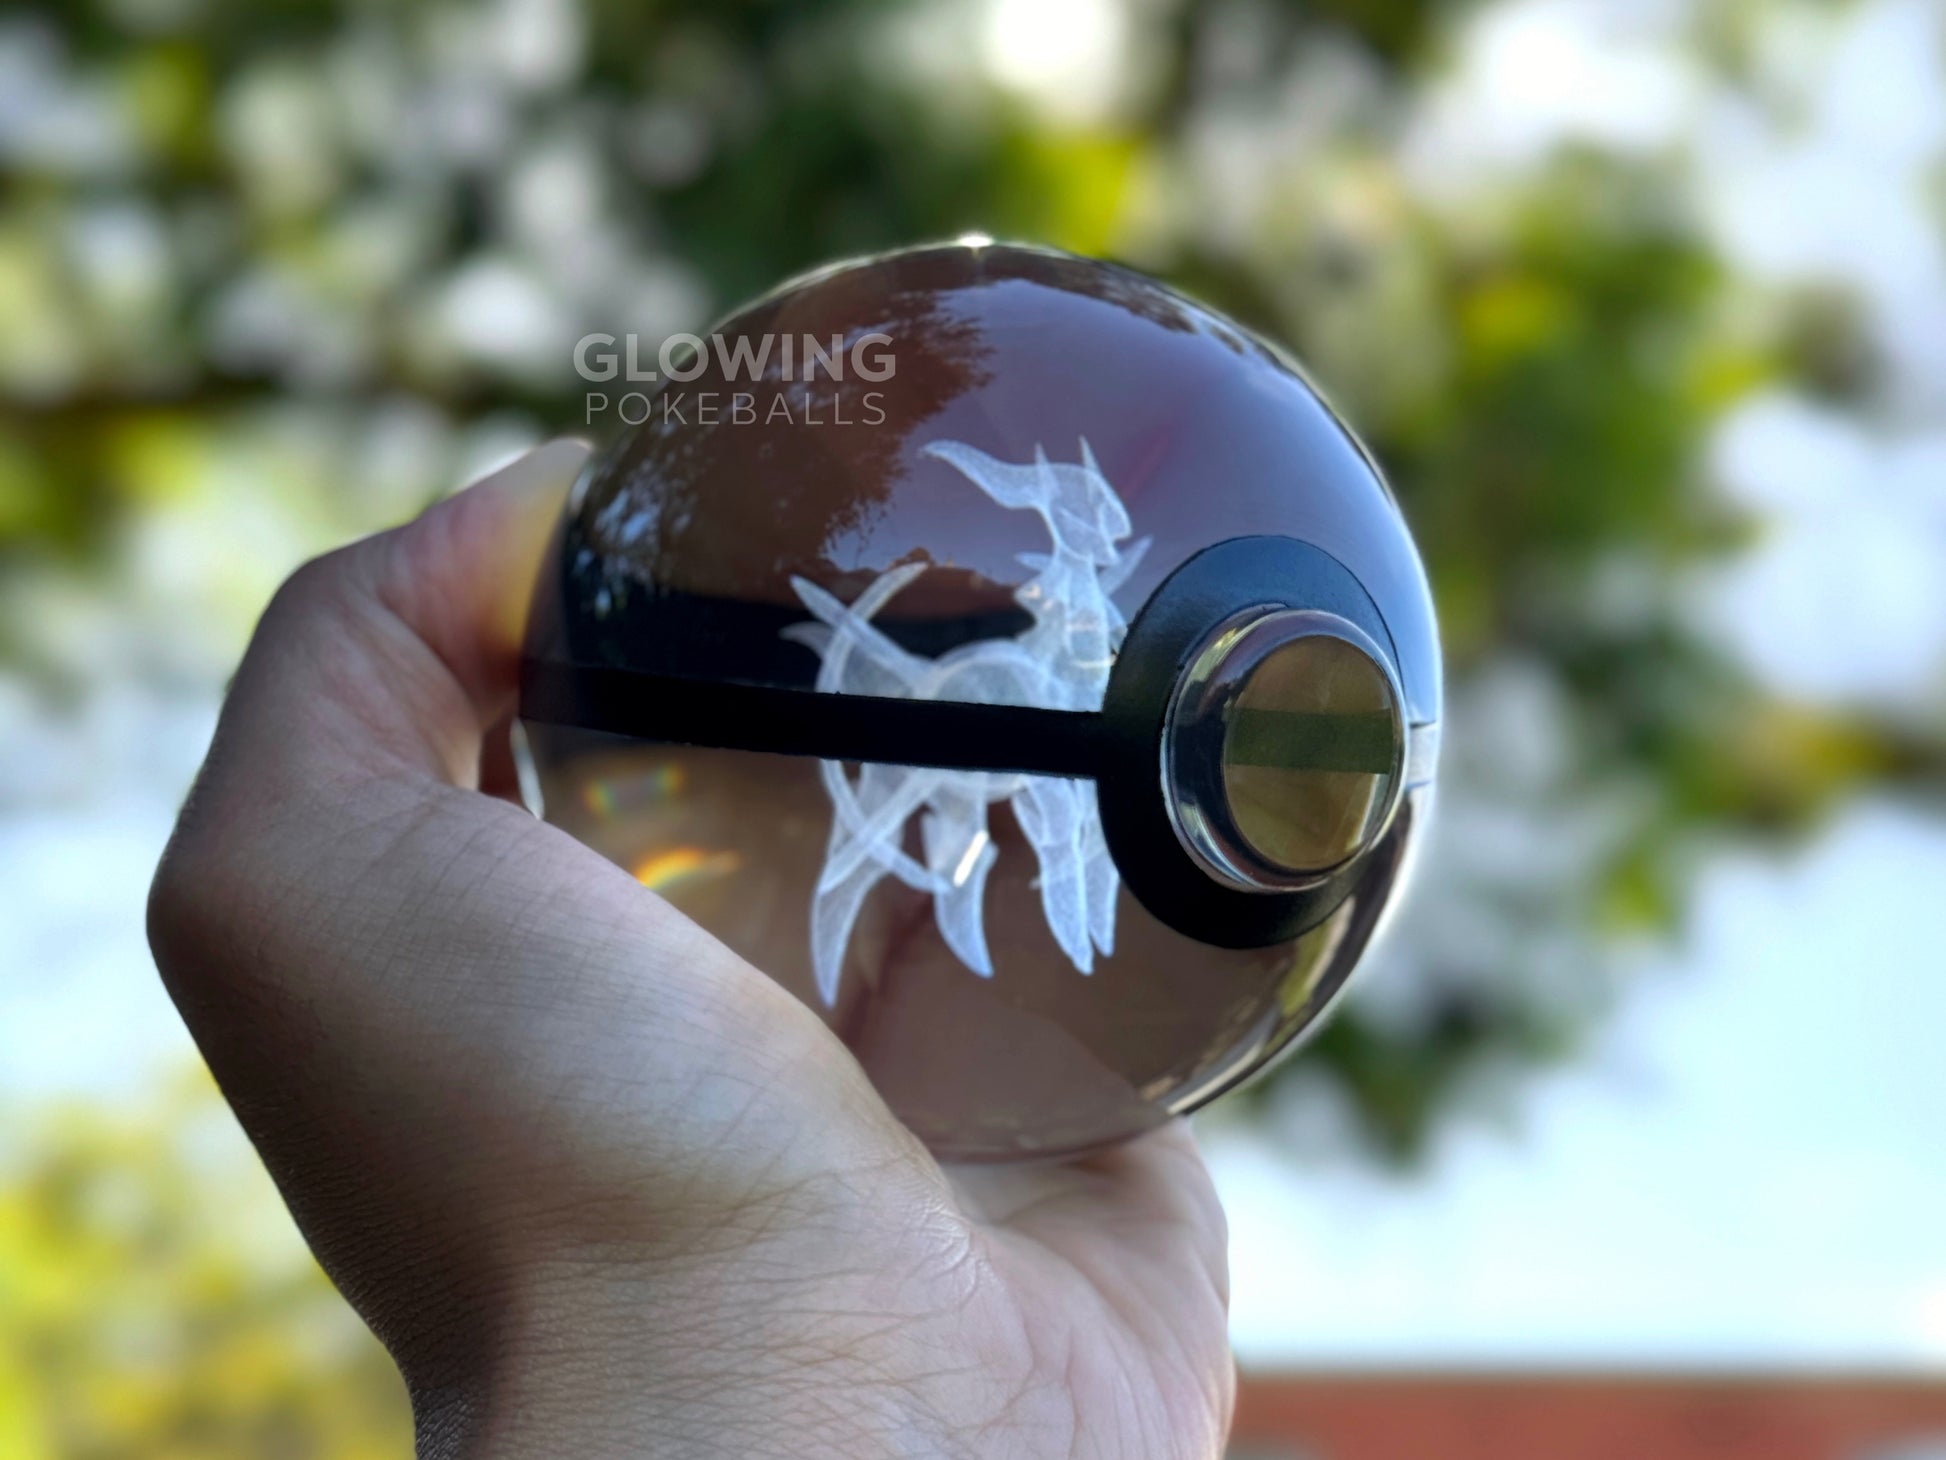 Arceus Crystal Pokeball outside in the sun